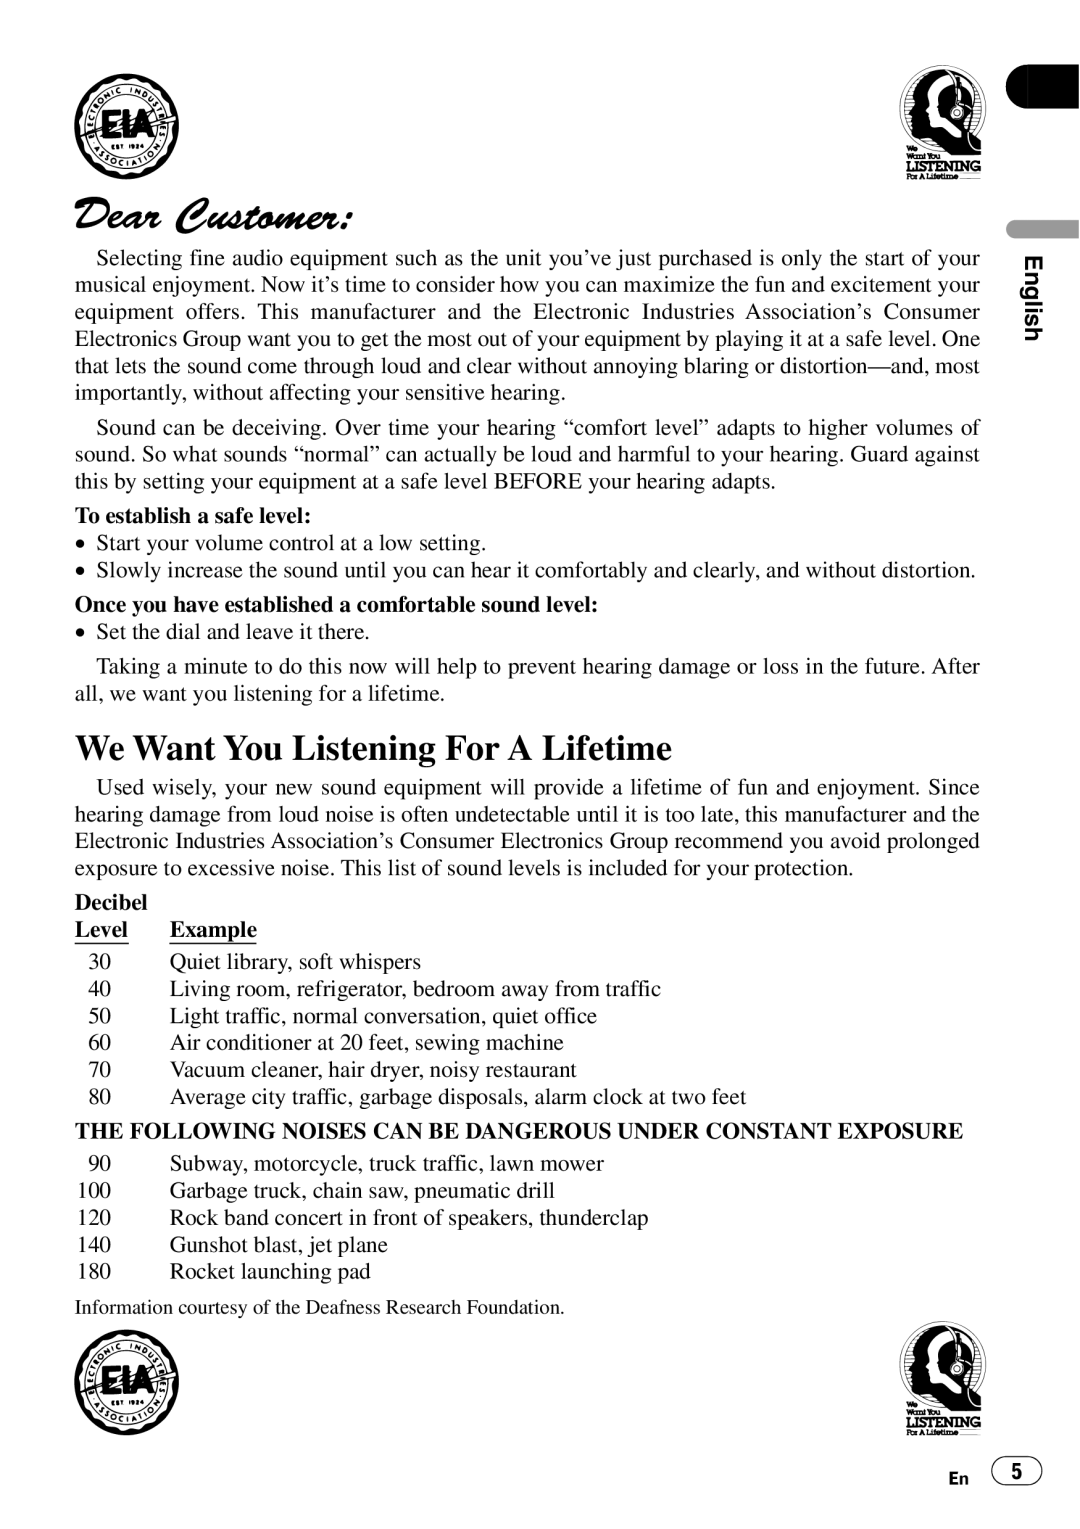 Pioneer DEH-P8600MP operation manual We Want You Listening For A Lifetime, To establish a safe level, Decibel Level Example 